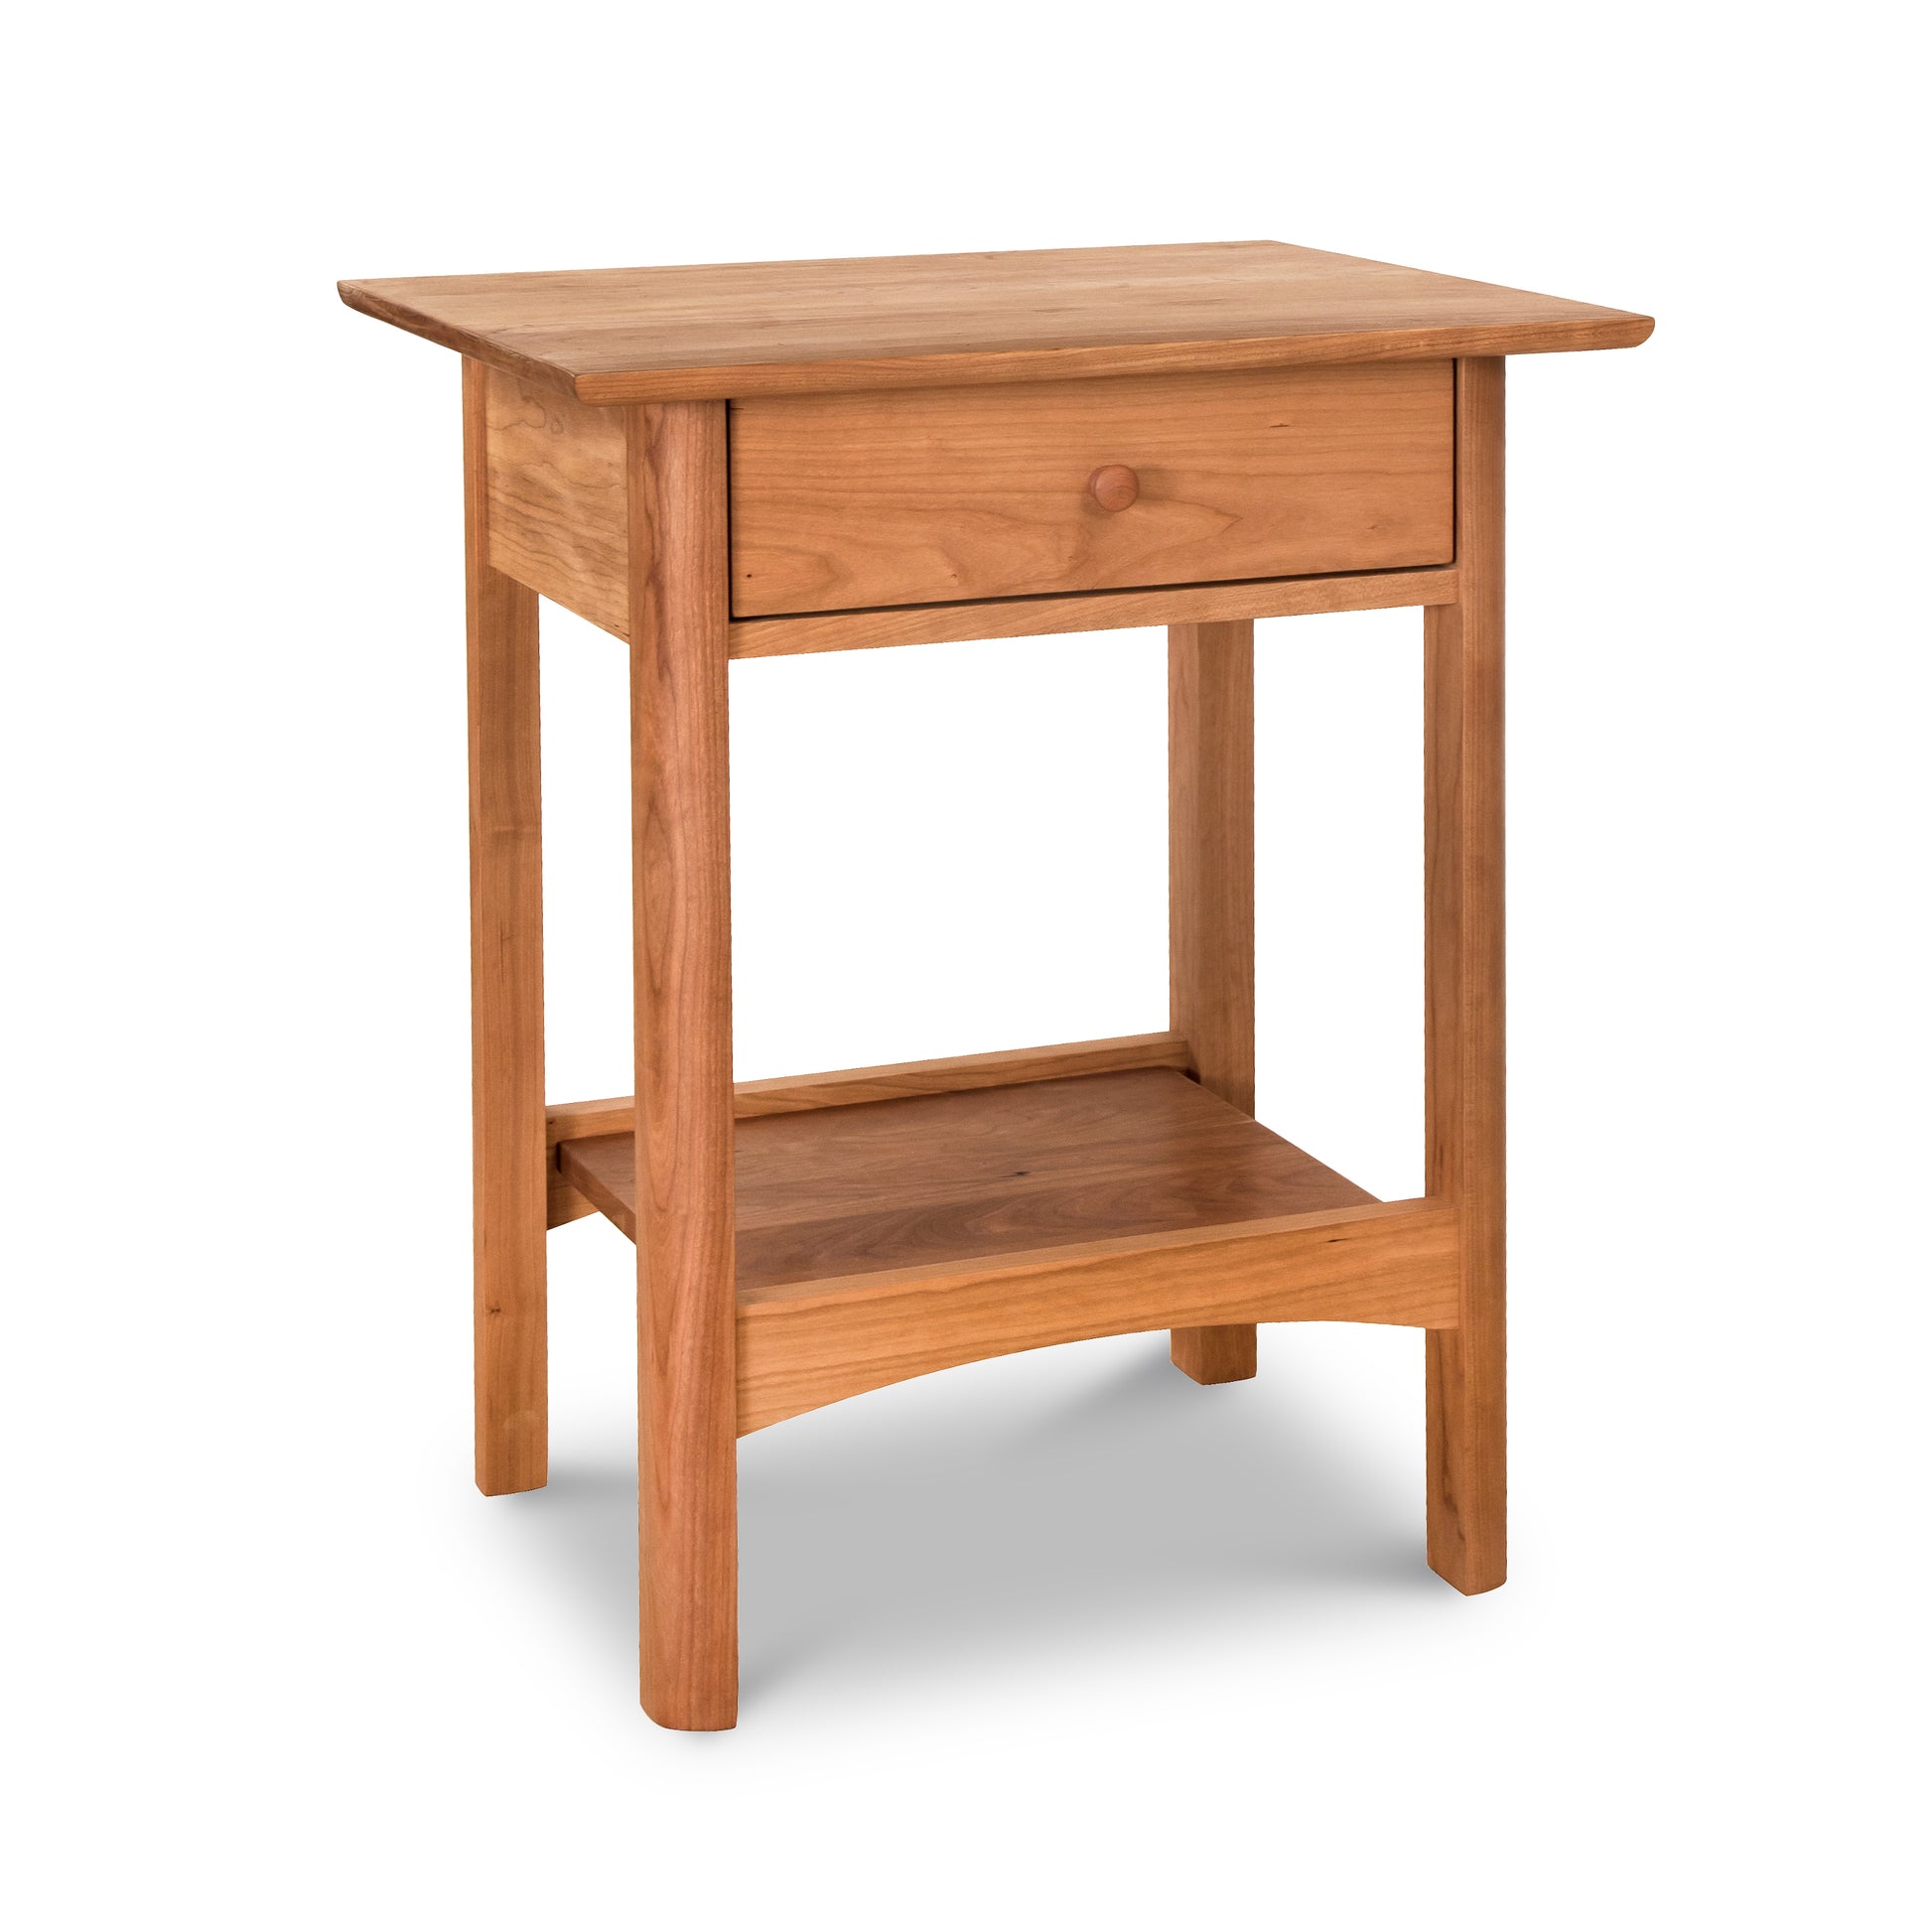 A wooden nightstand with a shelf on top.